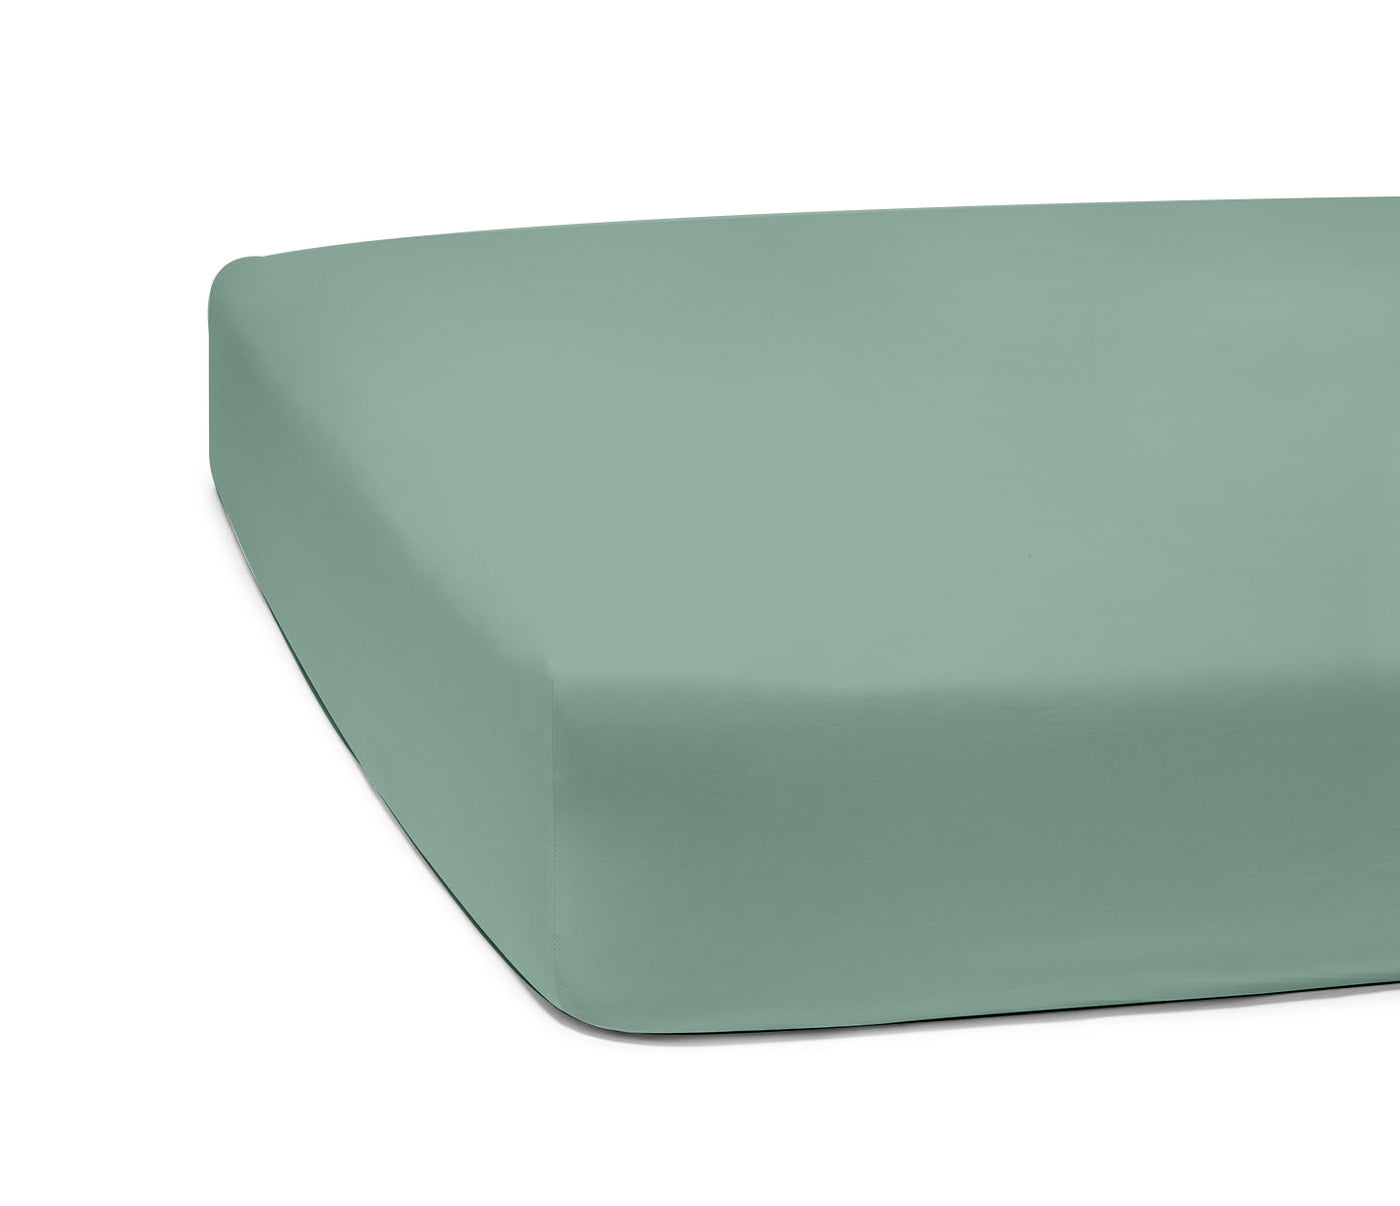 Fitted Bed Sheet Green